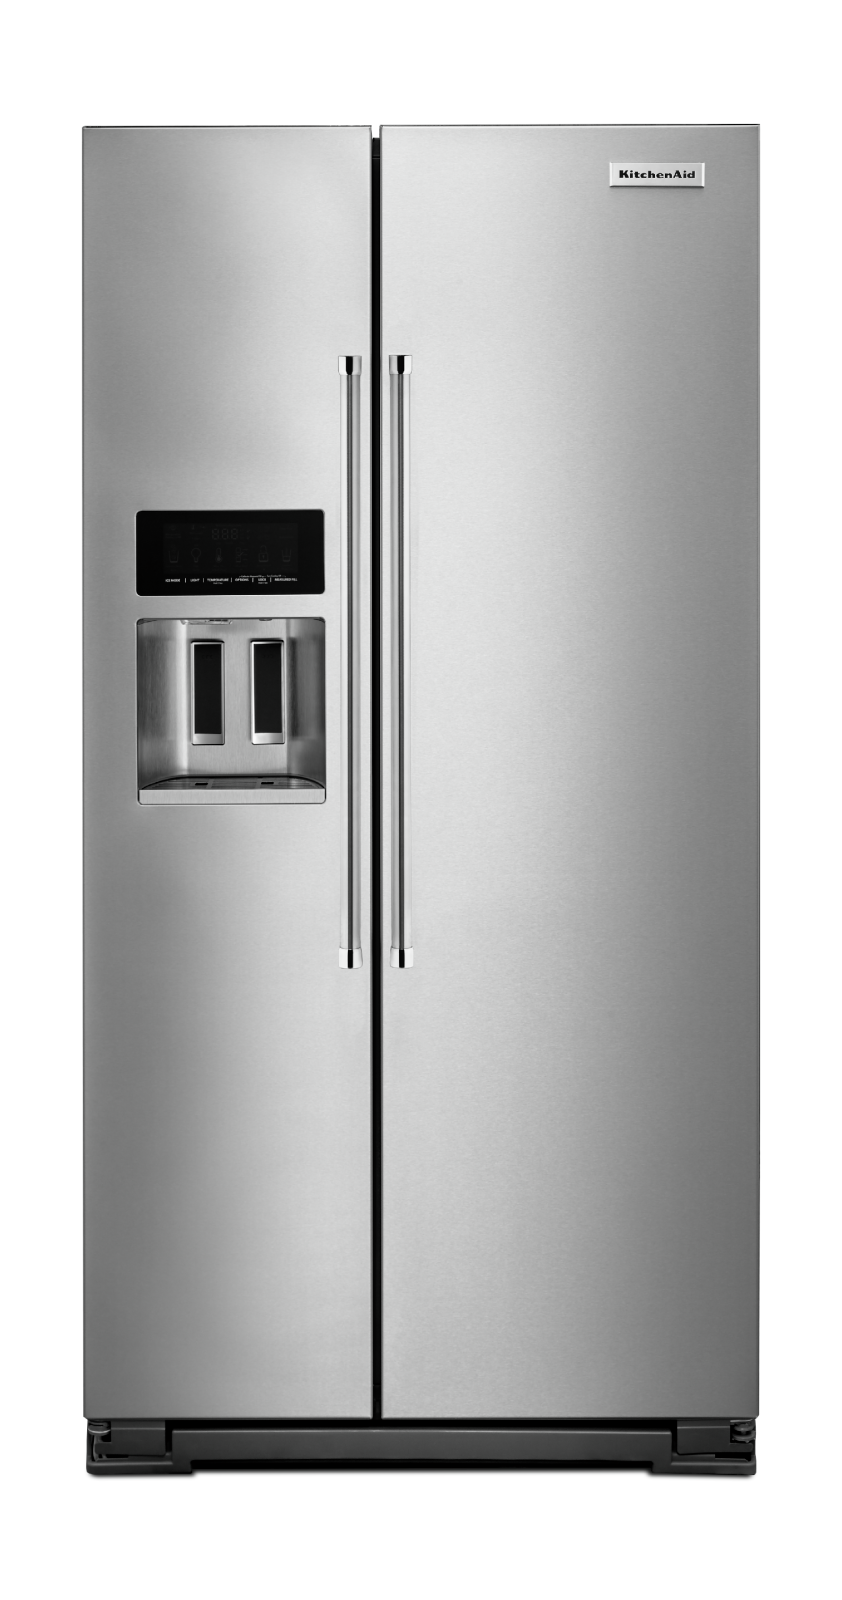 KitchenAid - 35.75 Inch 22.65 cu. ft Side by Side Refrigerator in Stainless - KRSC503ESS